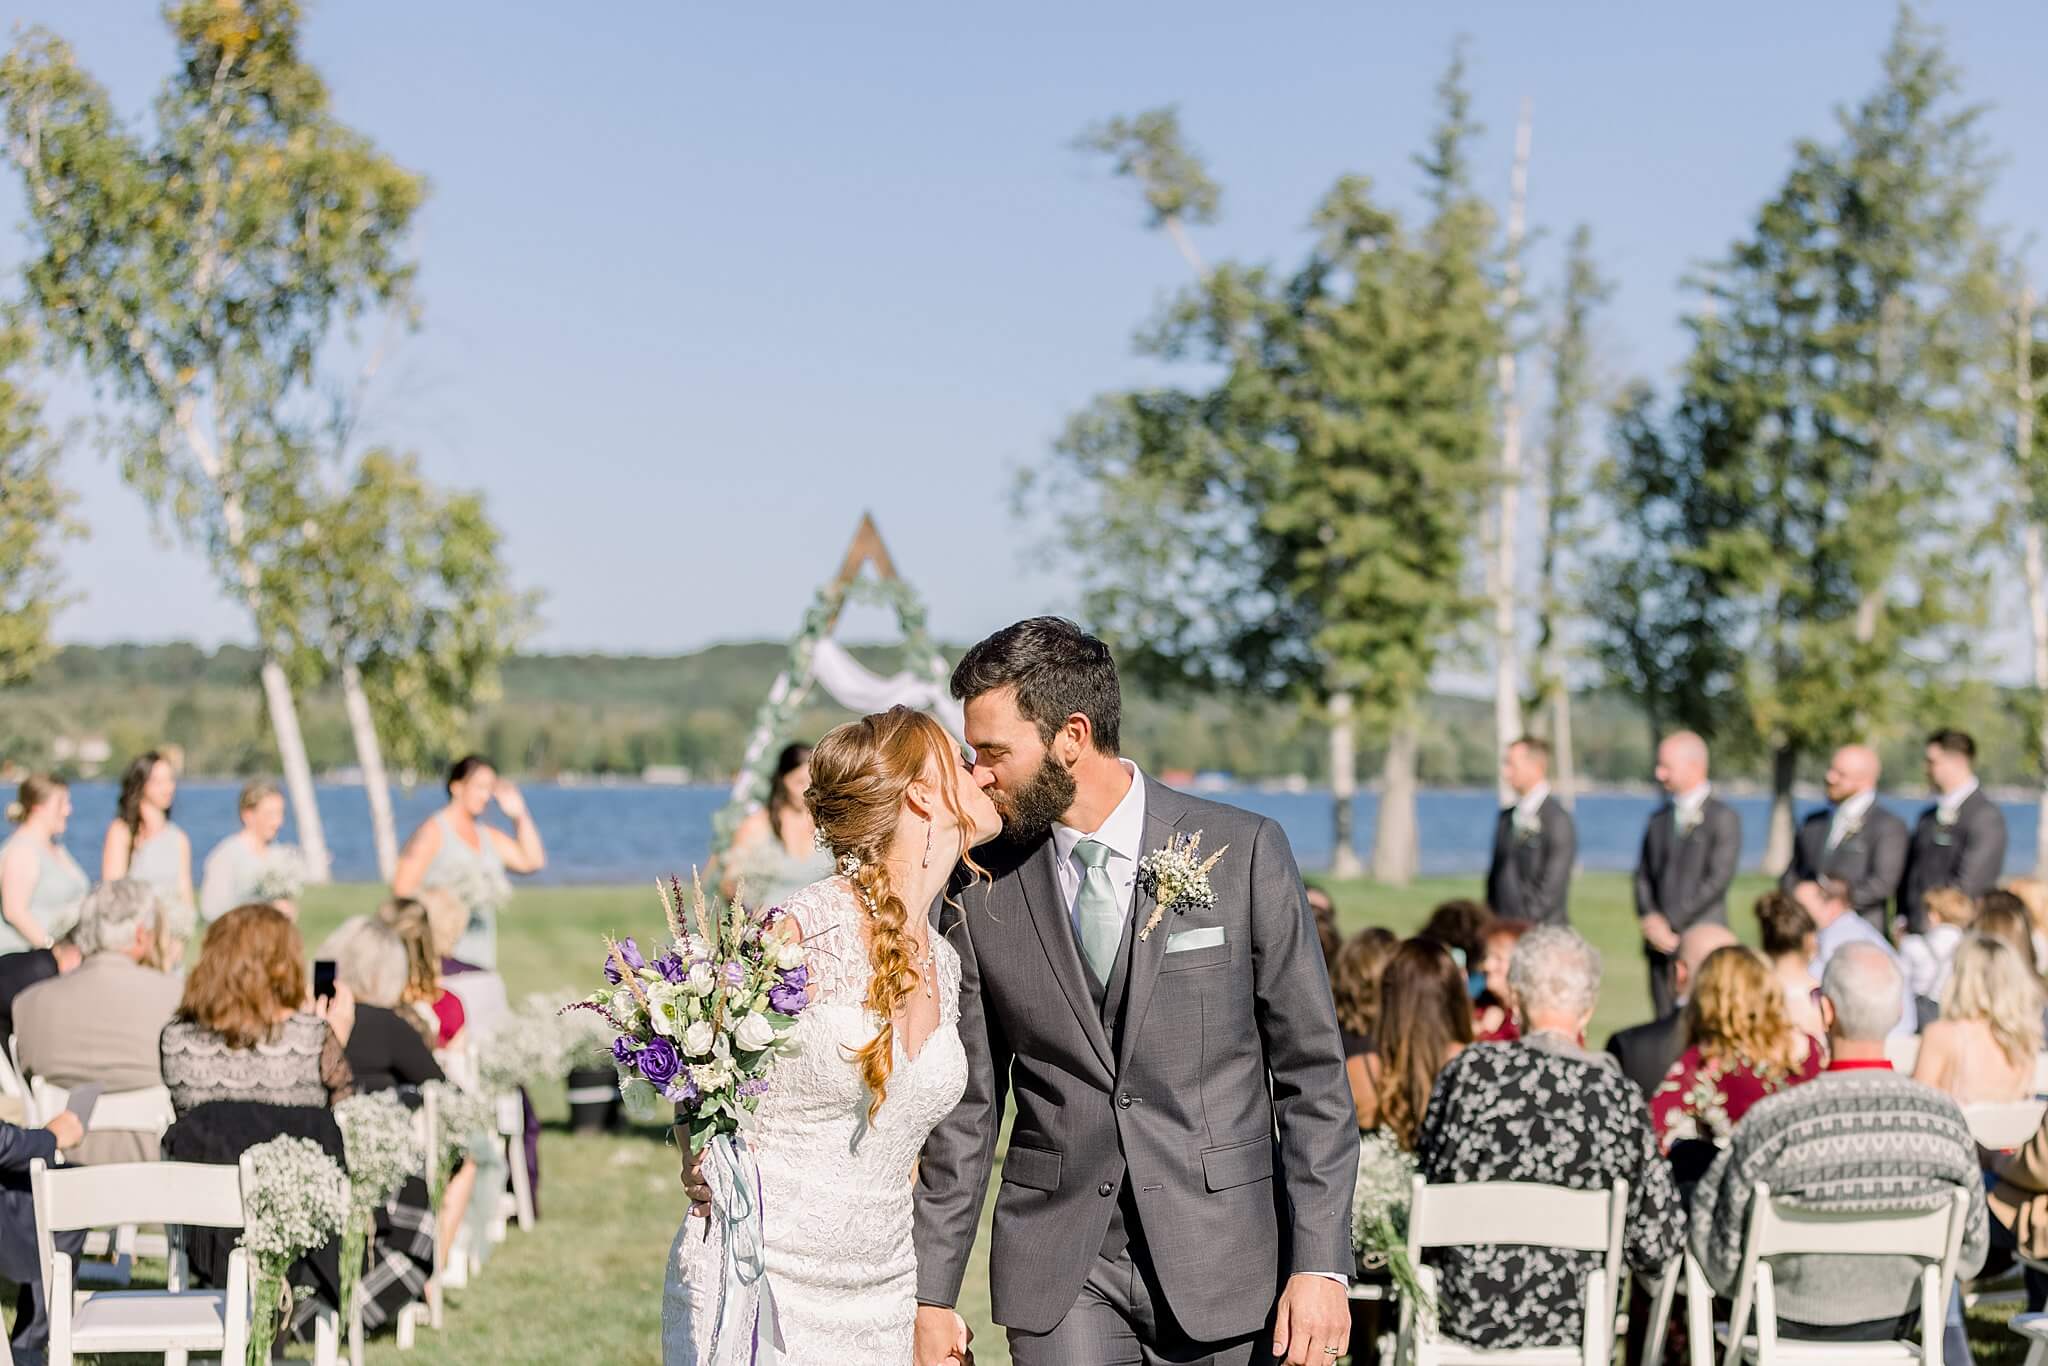 Bride and groom share kiss while leaving wedding ceremony at Crooked Creek Ranch wedding.